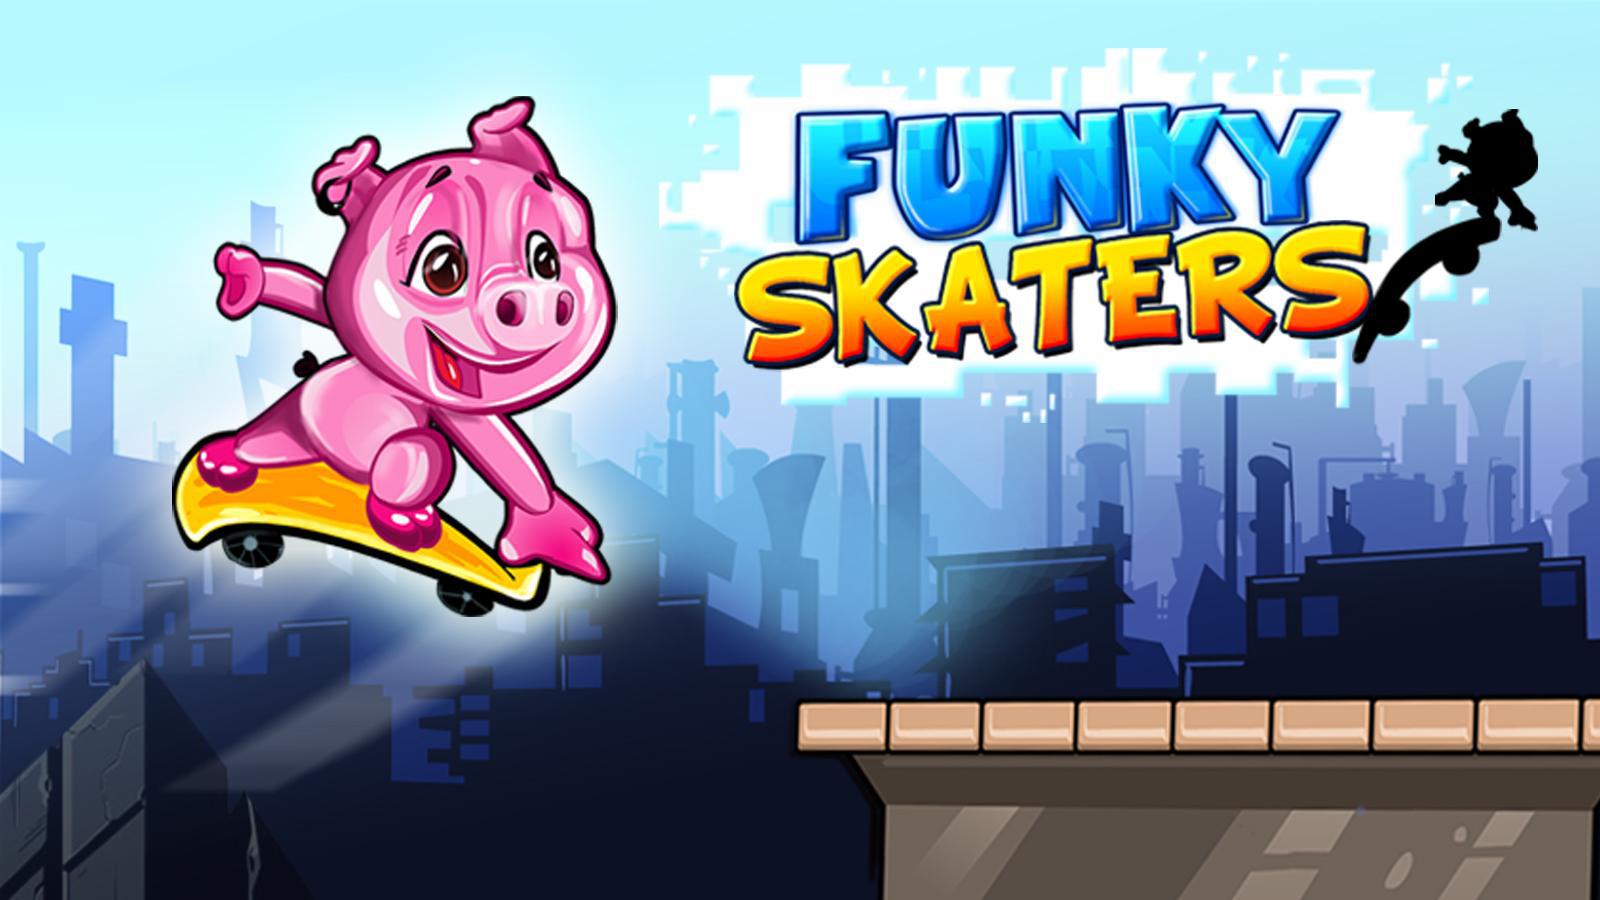 Endless Funky Skaters